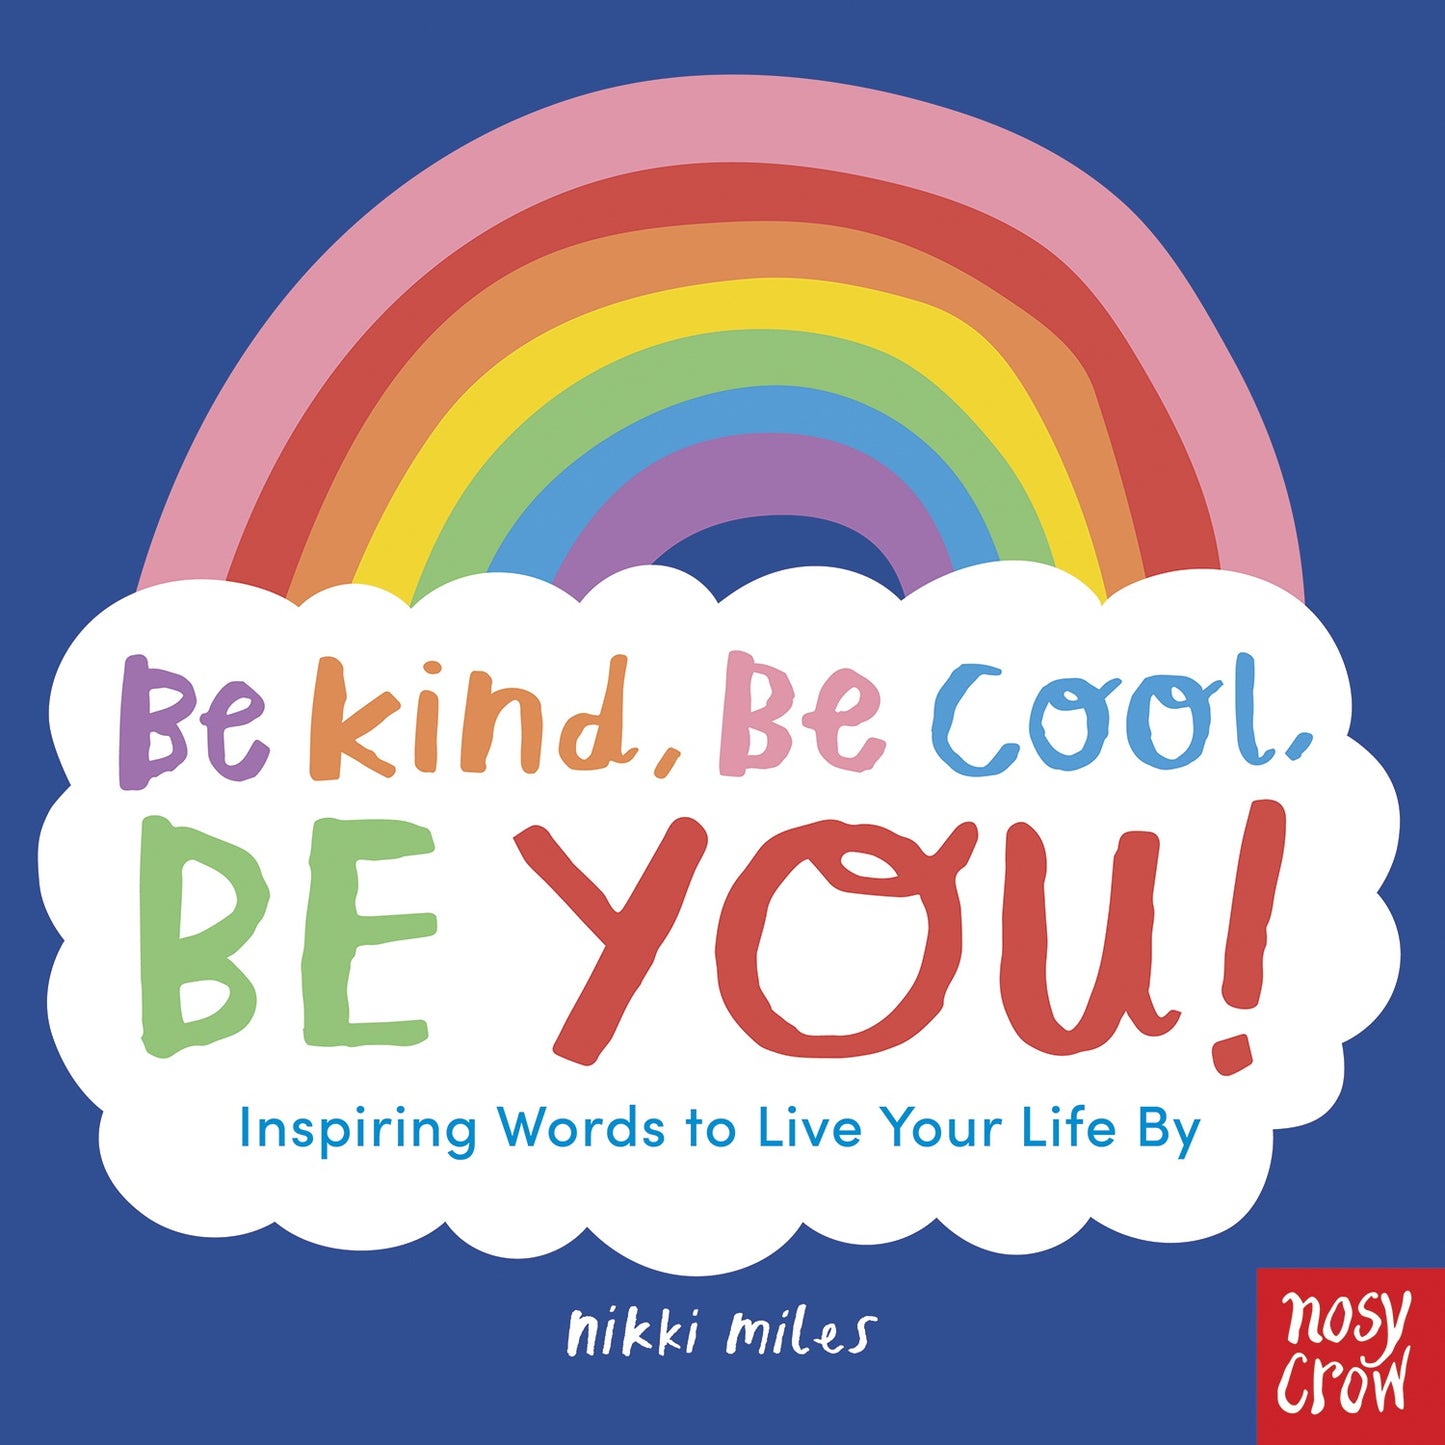 Book: Be kind, be cool, be you!